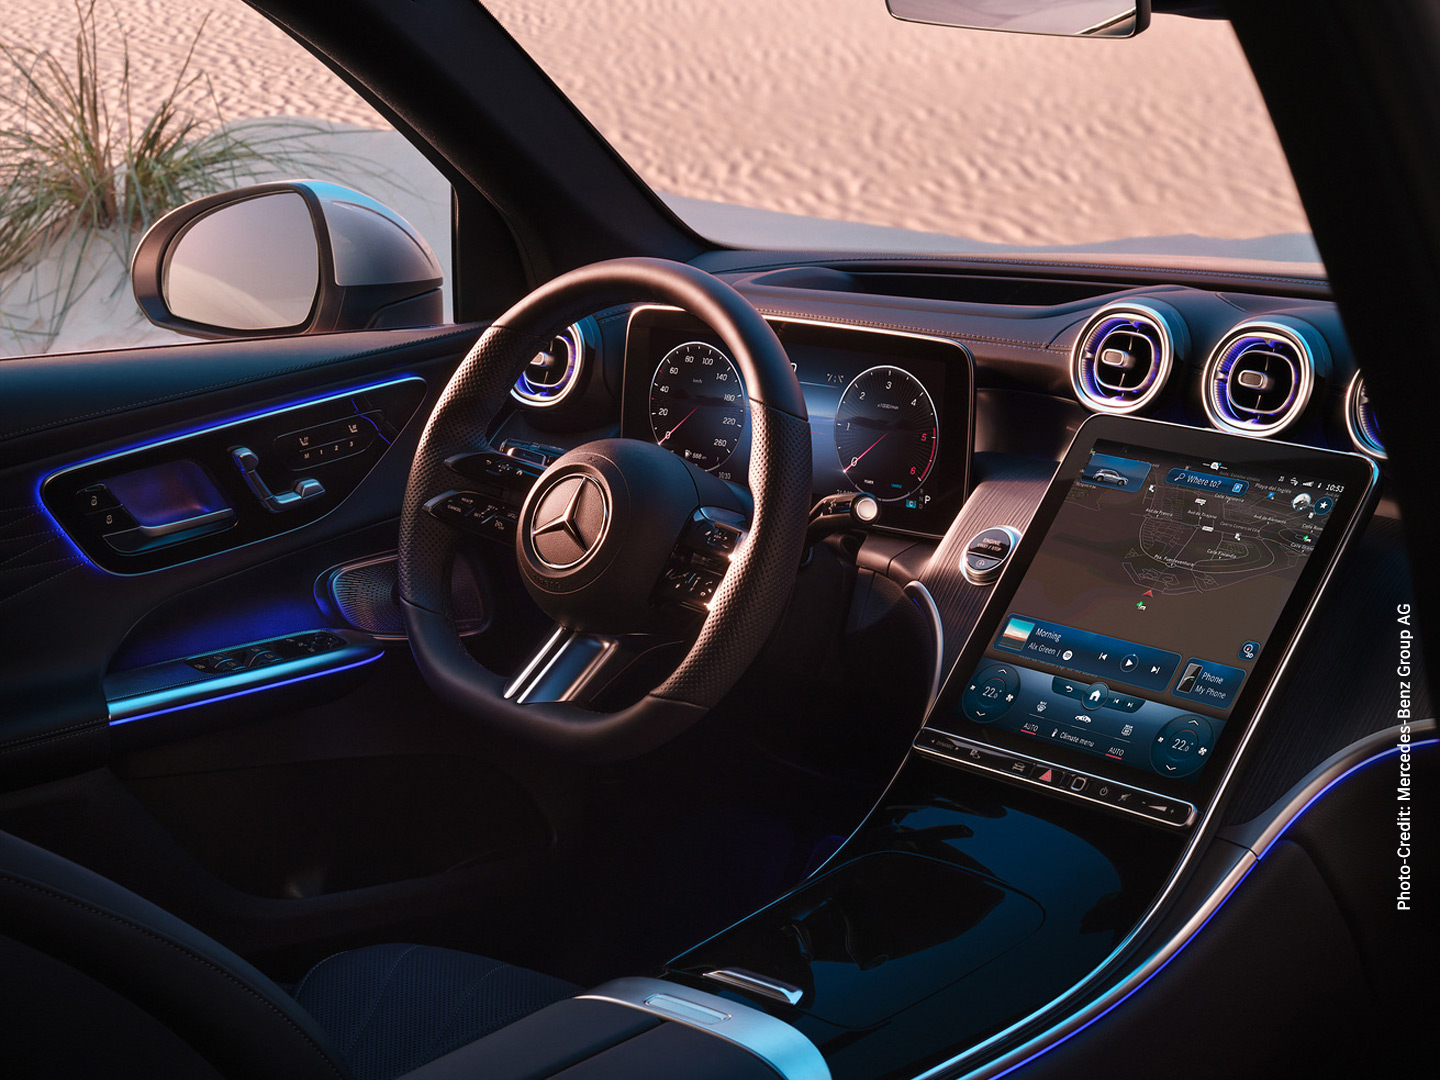 Photo-Credit: Mercedes-Benz Group AG